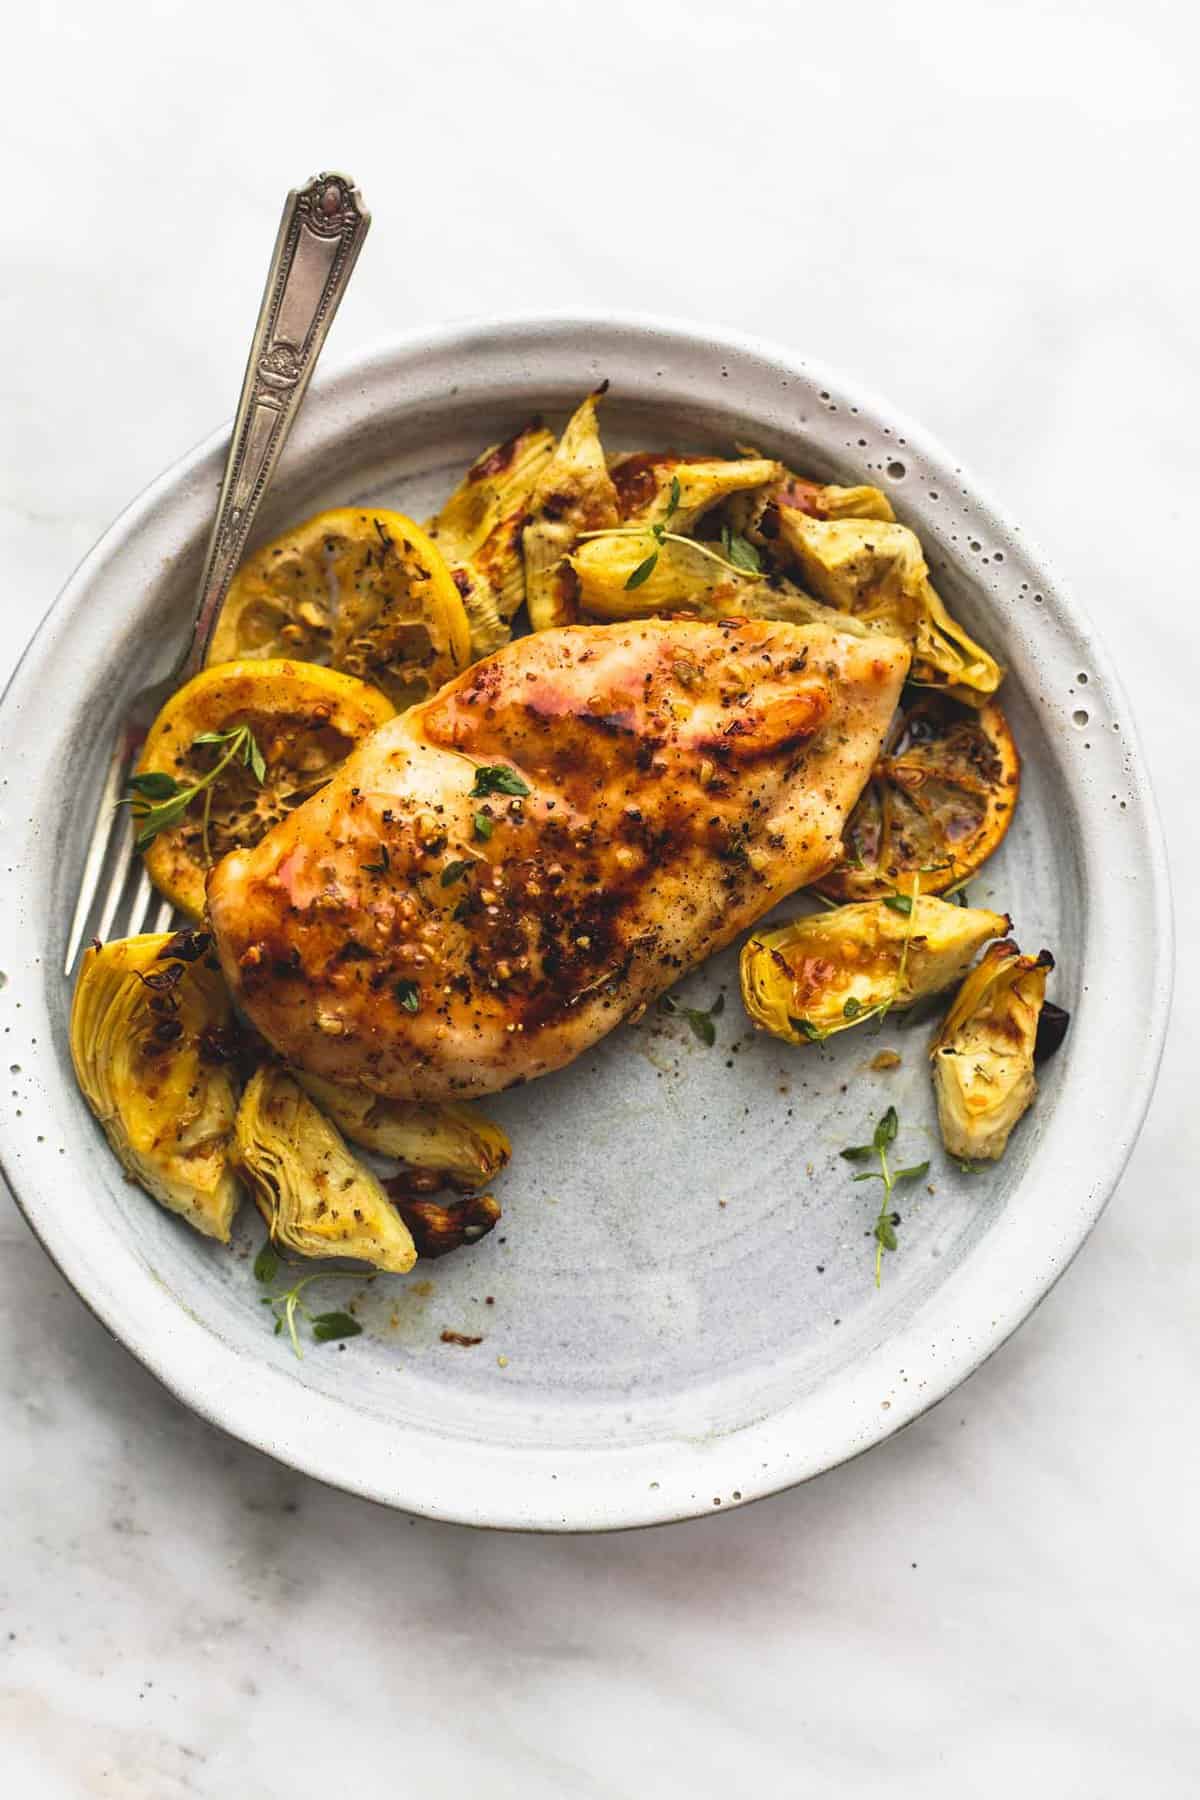 top view of baked lemon chicken and artichokes and a fork on a plate.